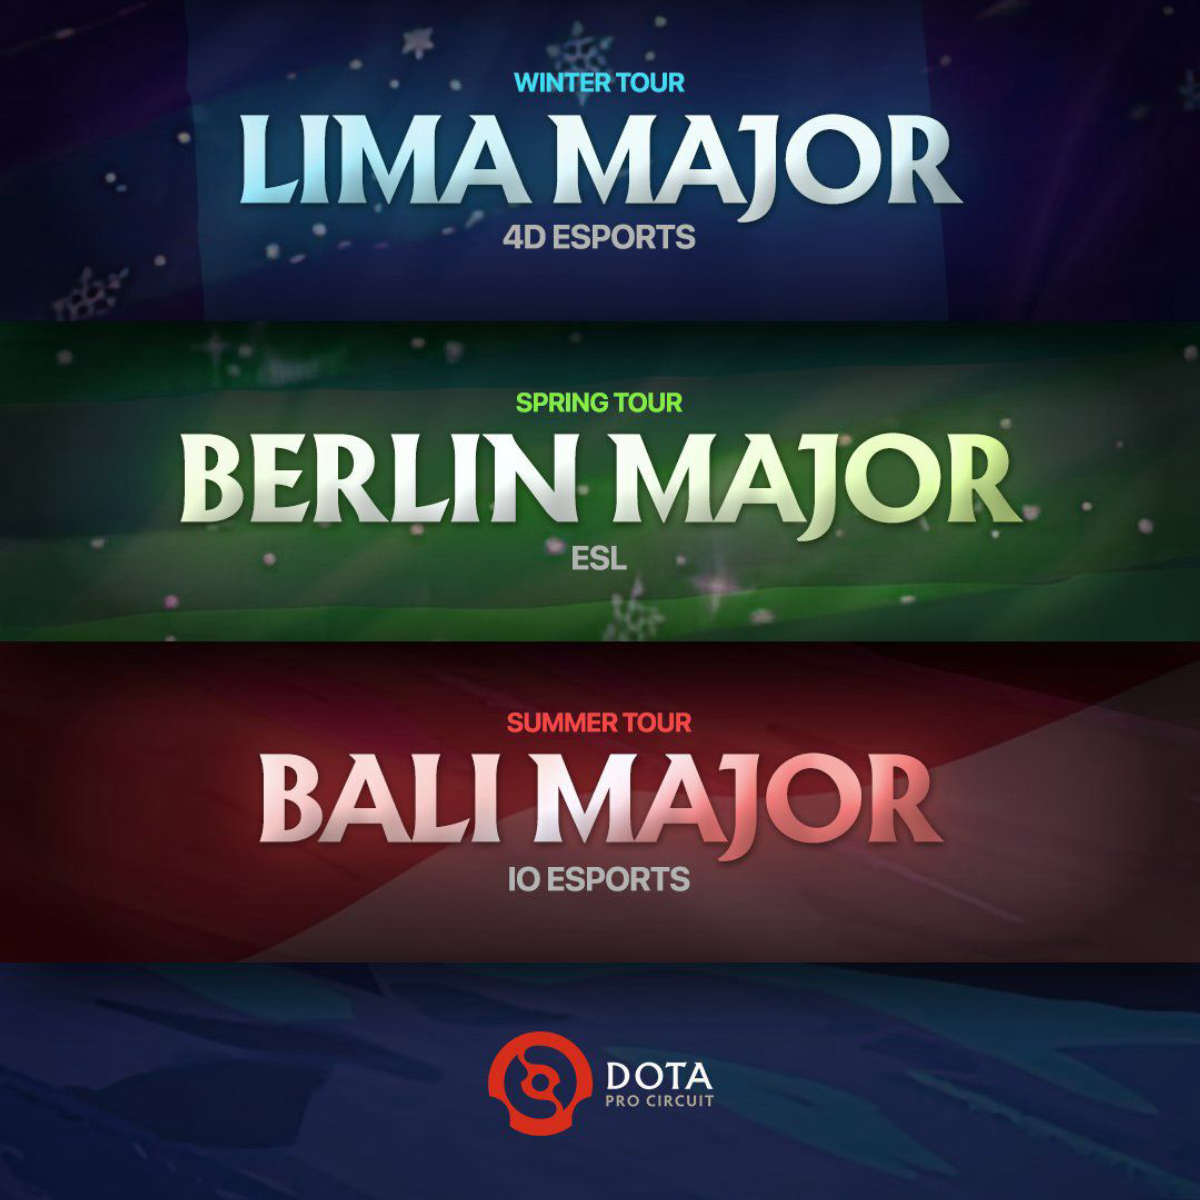 Valve announced the venues for the three Majors of the season - the main  DPC 2023 tournaments will be held in Peru, Germany and Bali. Dota 2 news -  eSports events review,